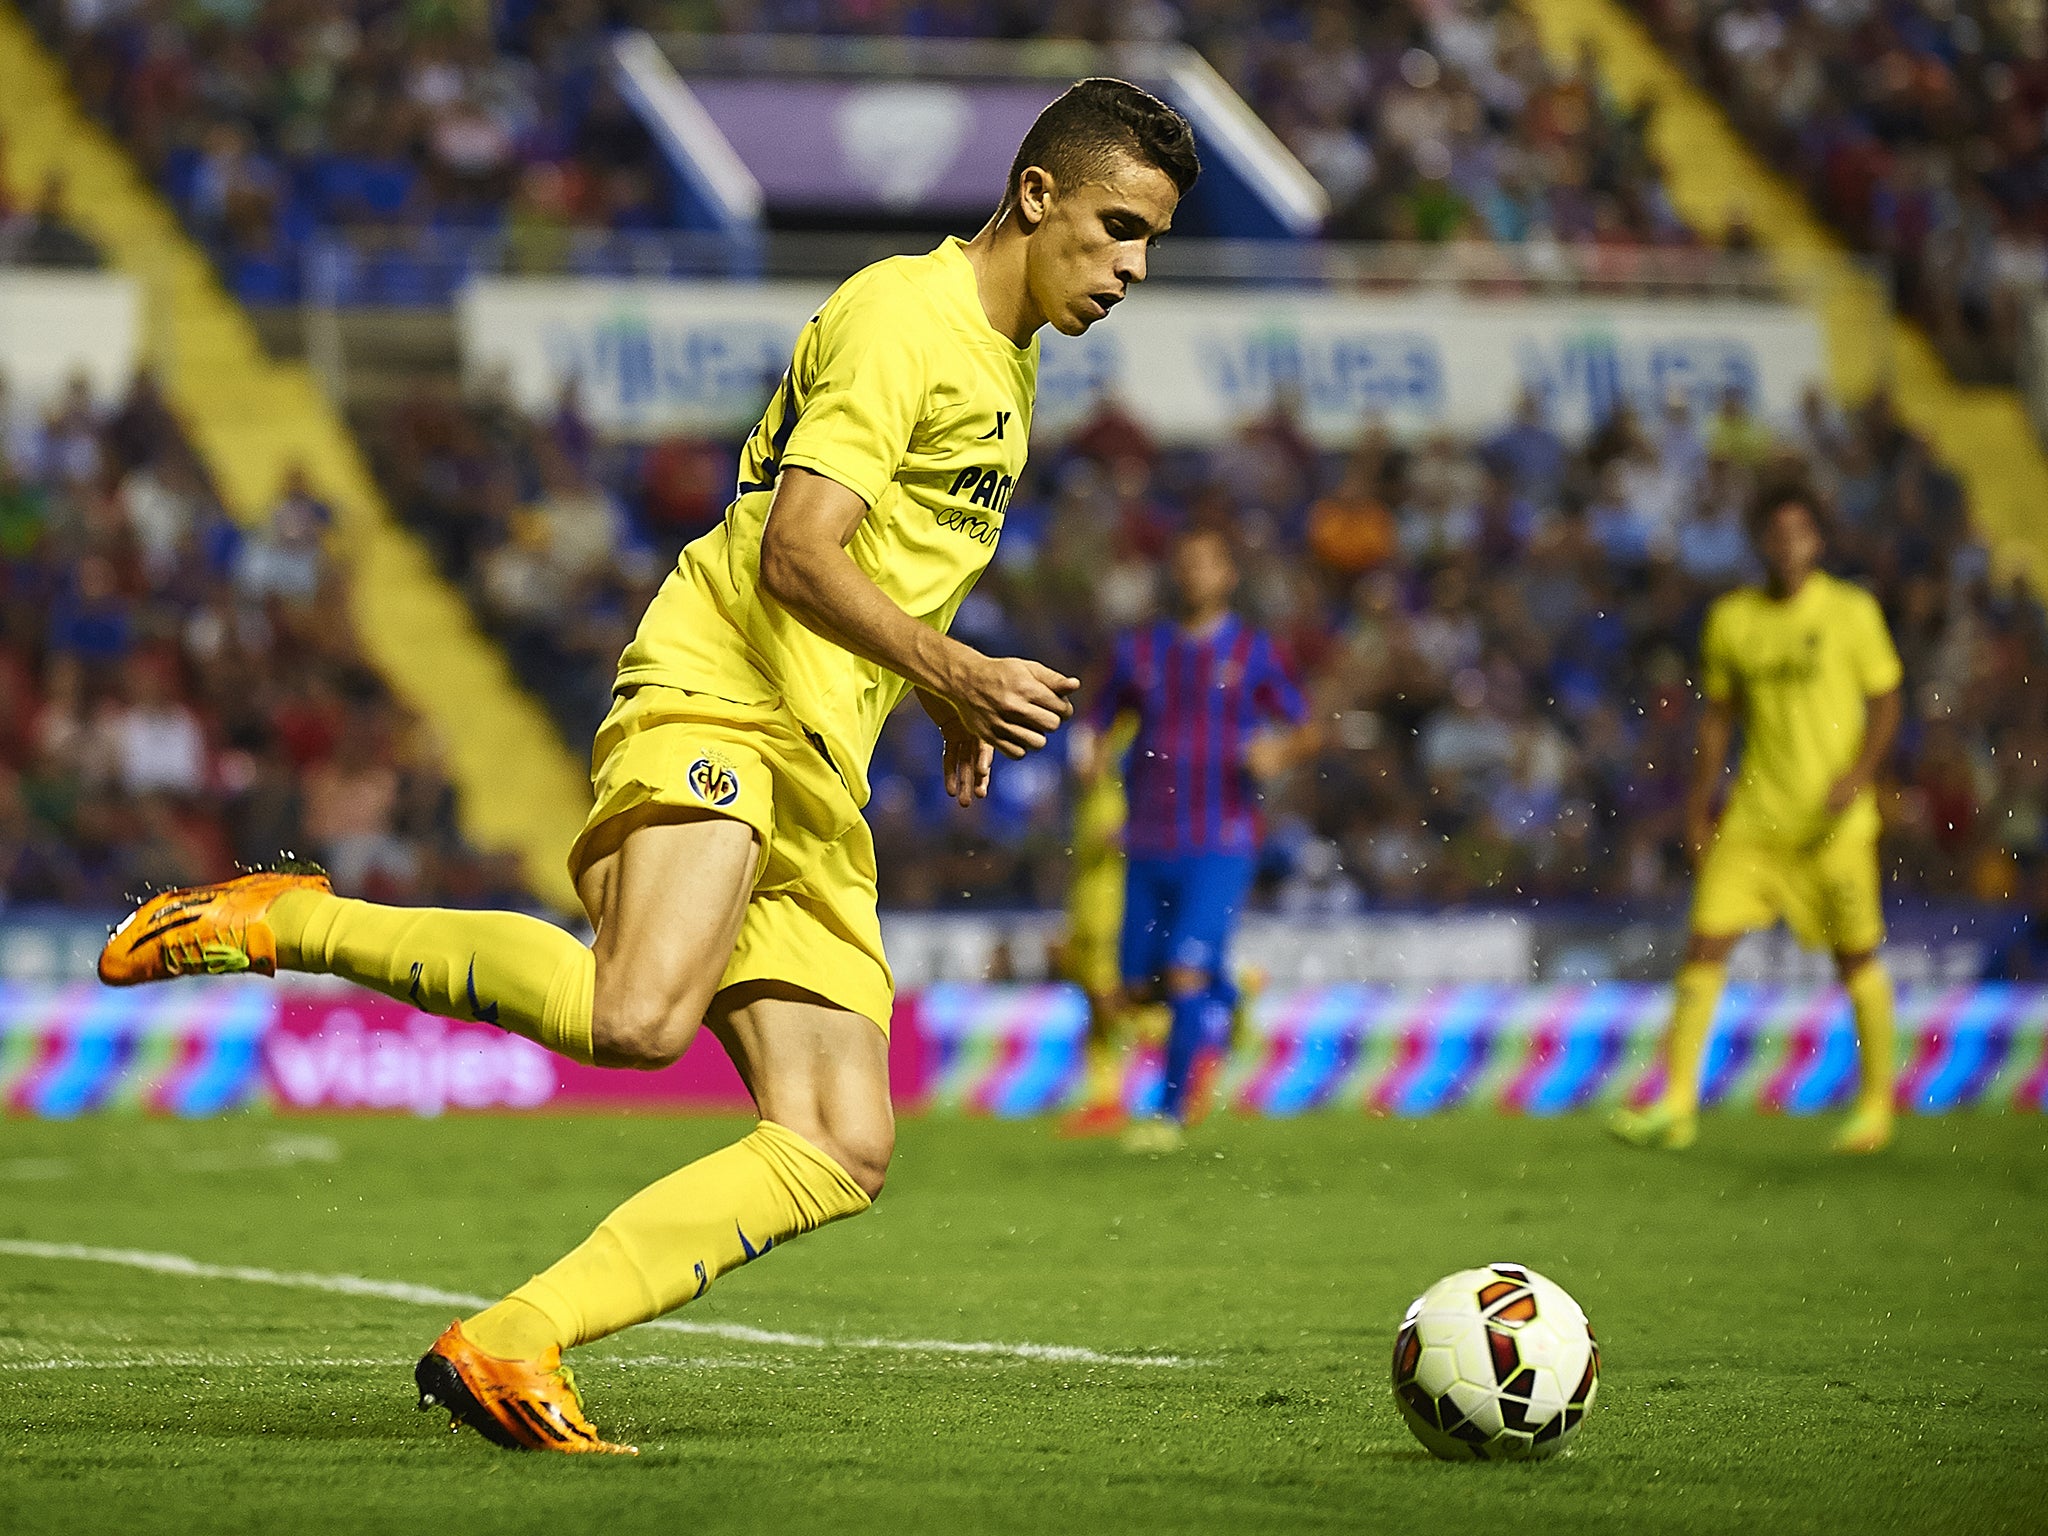 Arsenal's new £11.2m defender Gabriel Paulista can play centre-back or full-back (Getty)